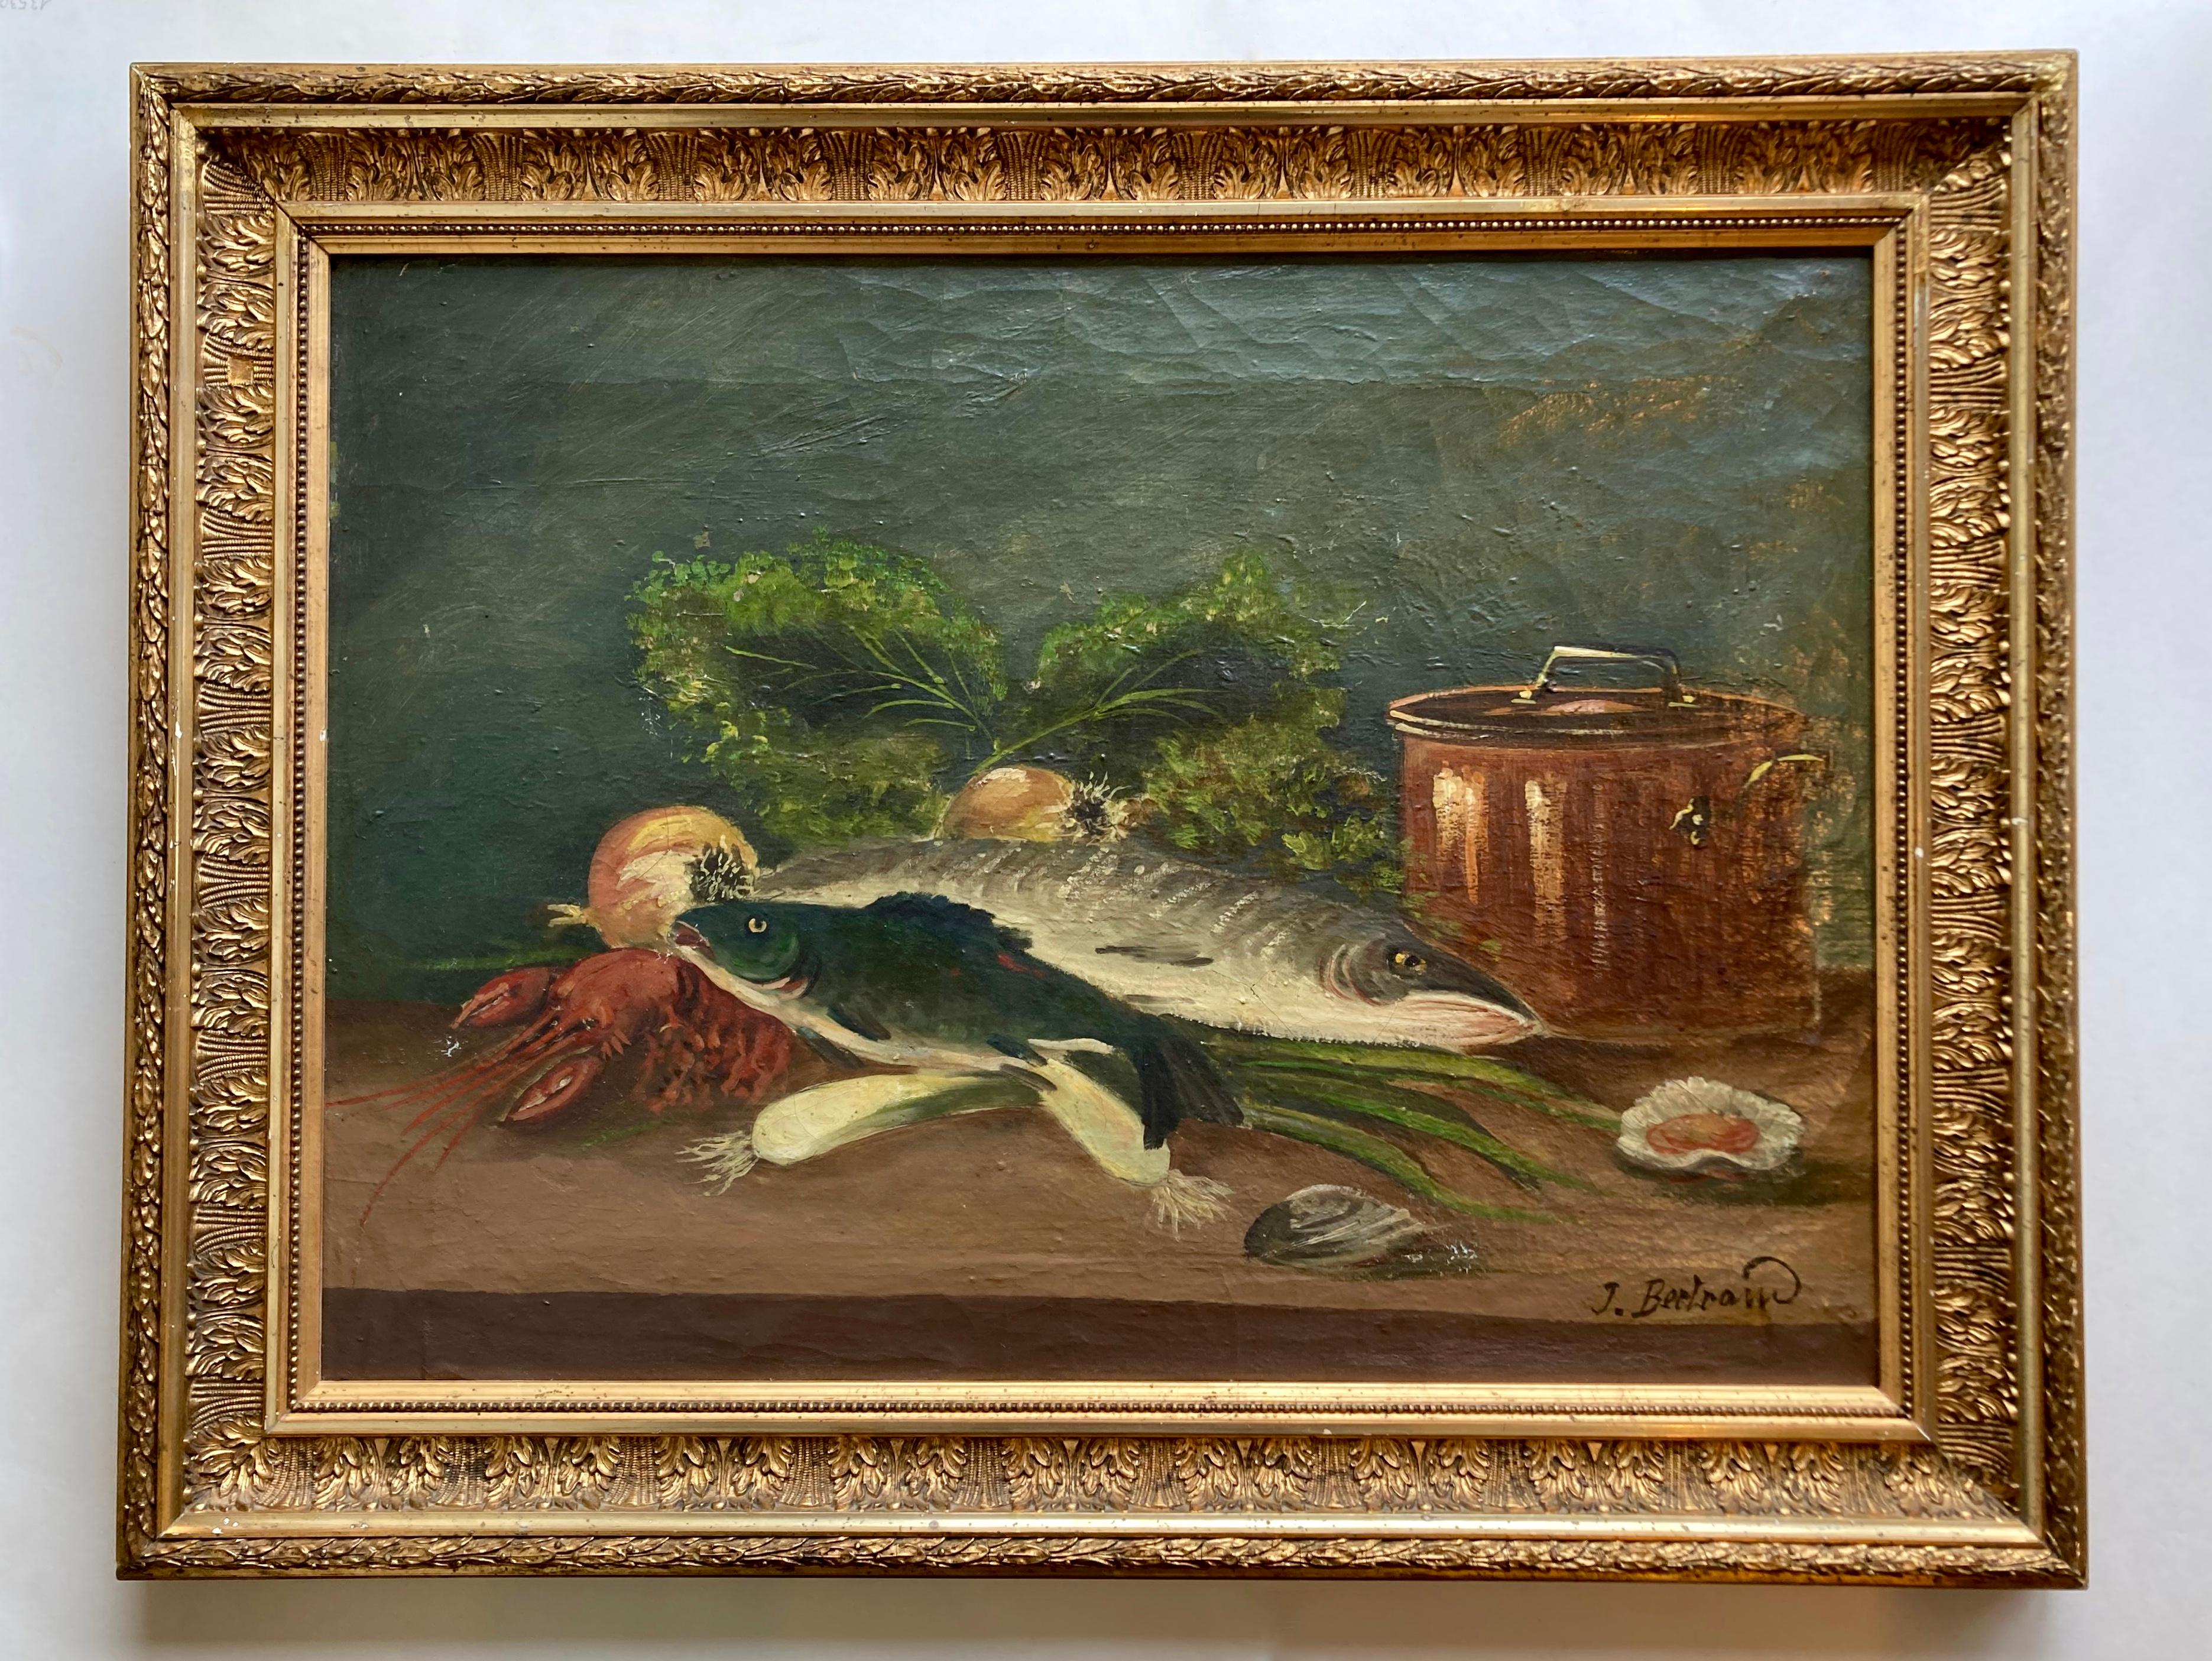 A large and impressive late 19th century still-life. This antique oil painting on stretched canvas is signed by the French artist J. Bertrand (see lower right corner) but not dated. The painting features a classic kitchen inspired still-life of fish